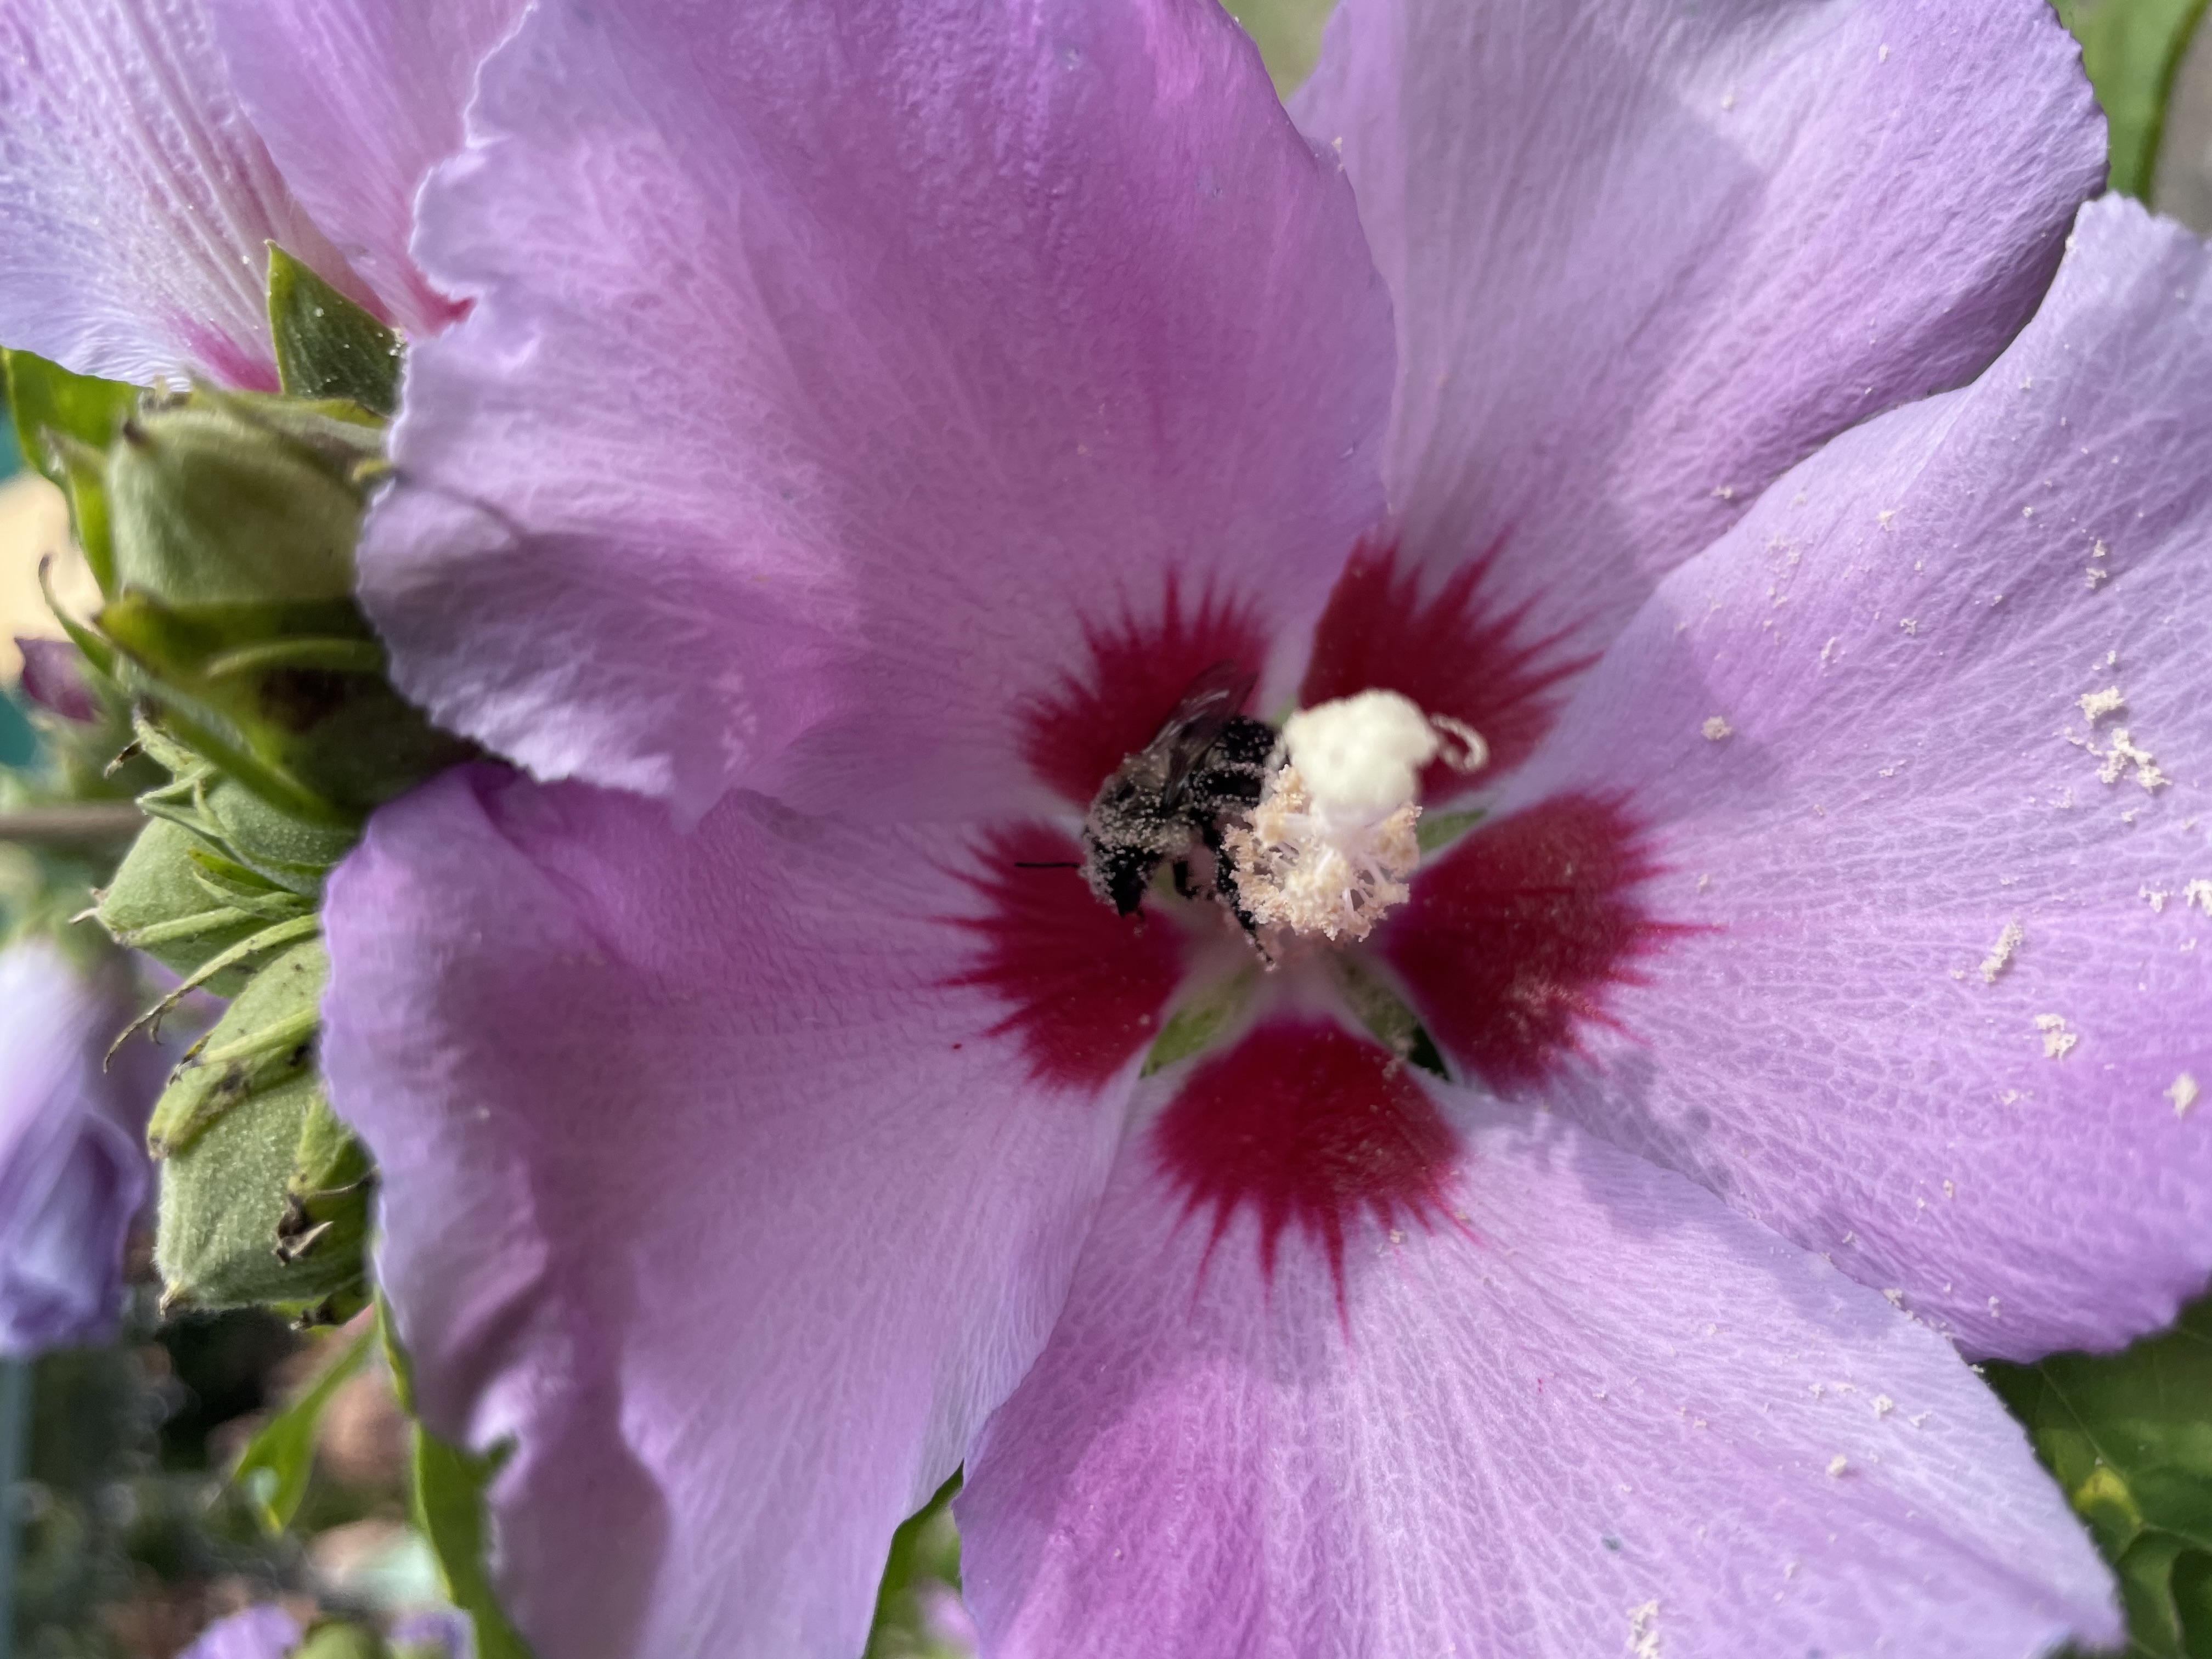 A picture of a bee in a flower